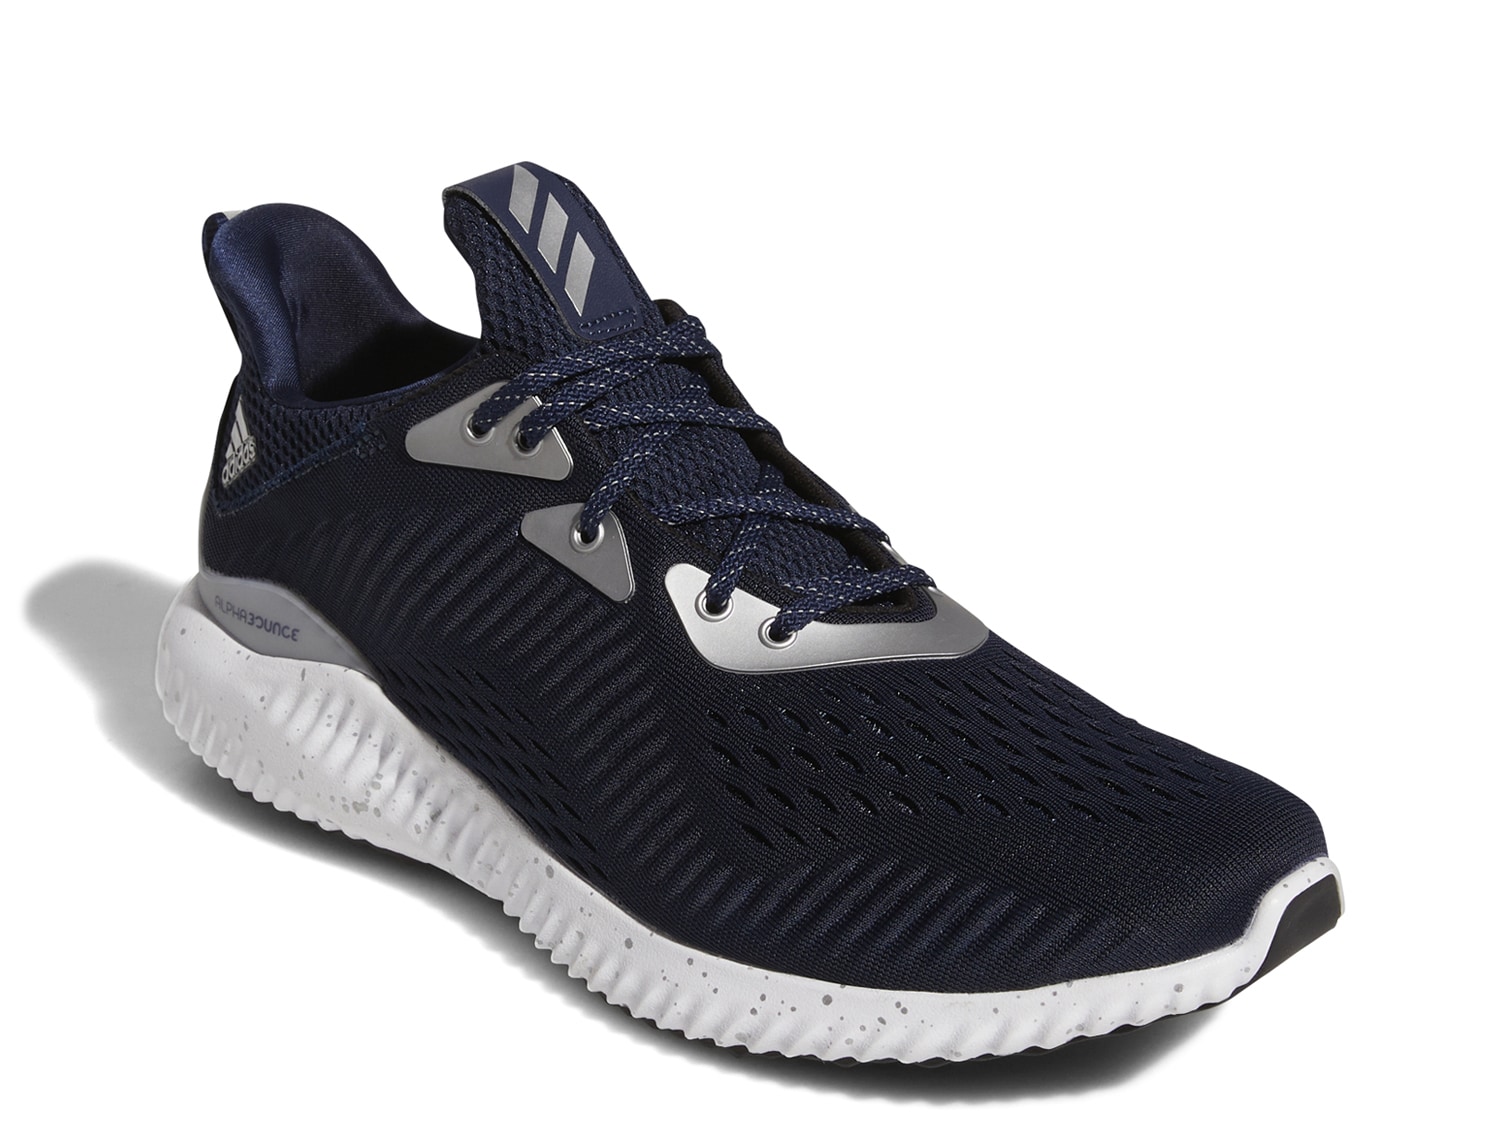 adidas Alphabounce Running - Men's - Free Shipping DSW